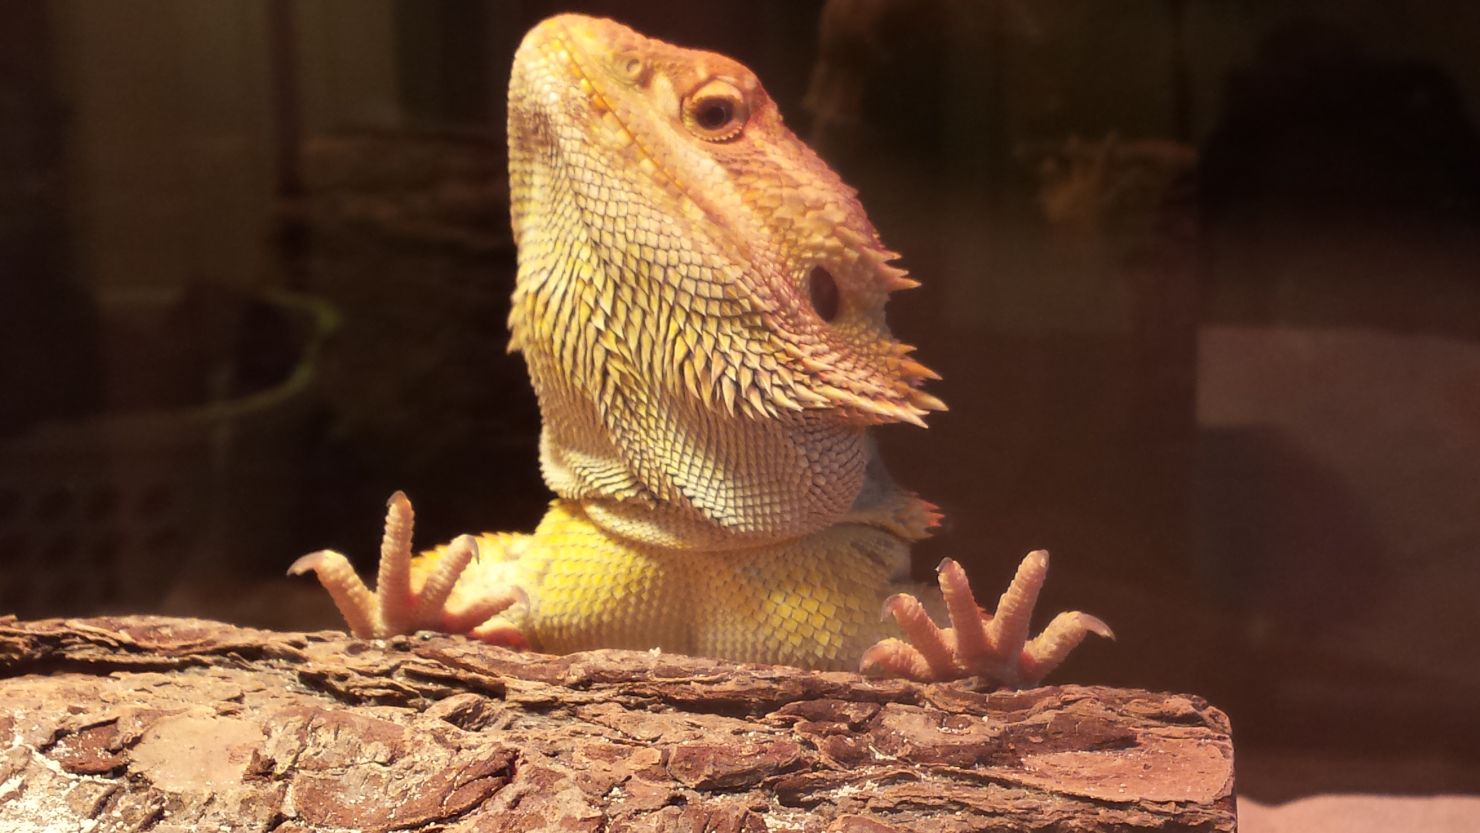 A new study finds that bearded dragons go through various stages of sleep, similar to humans.